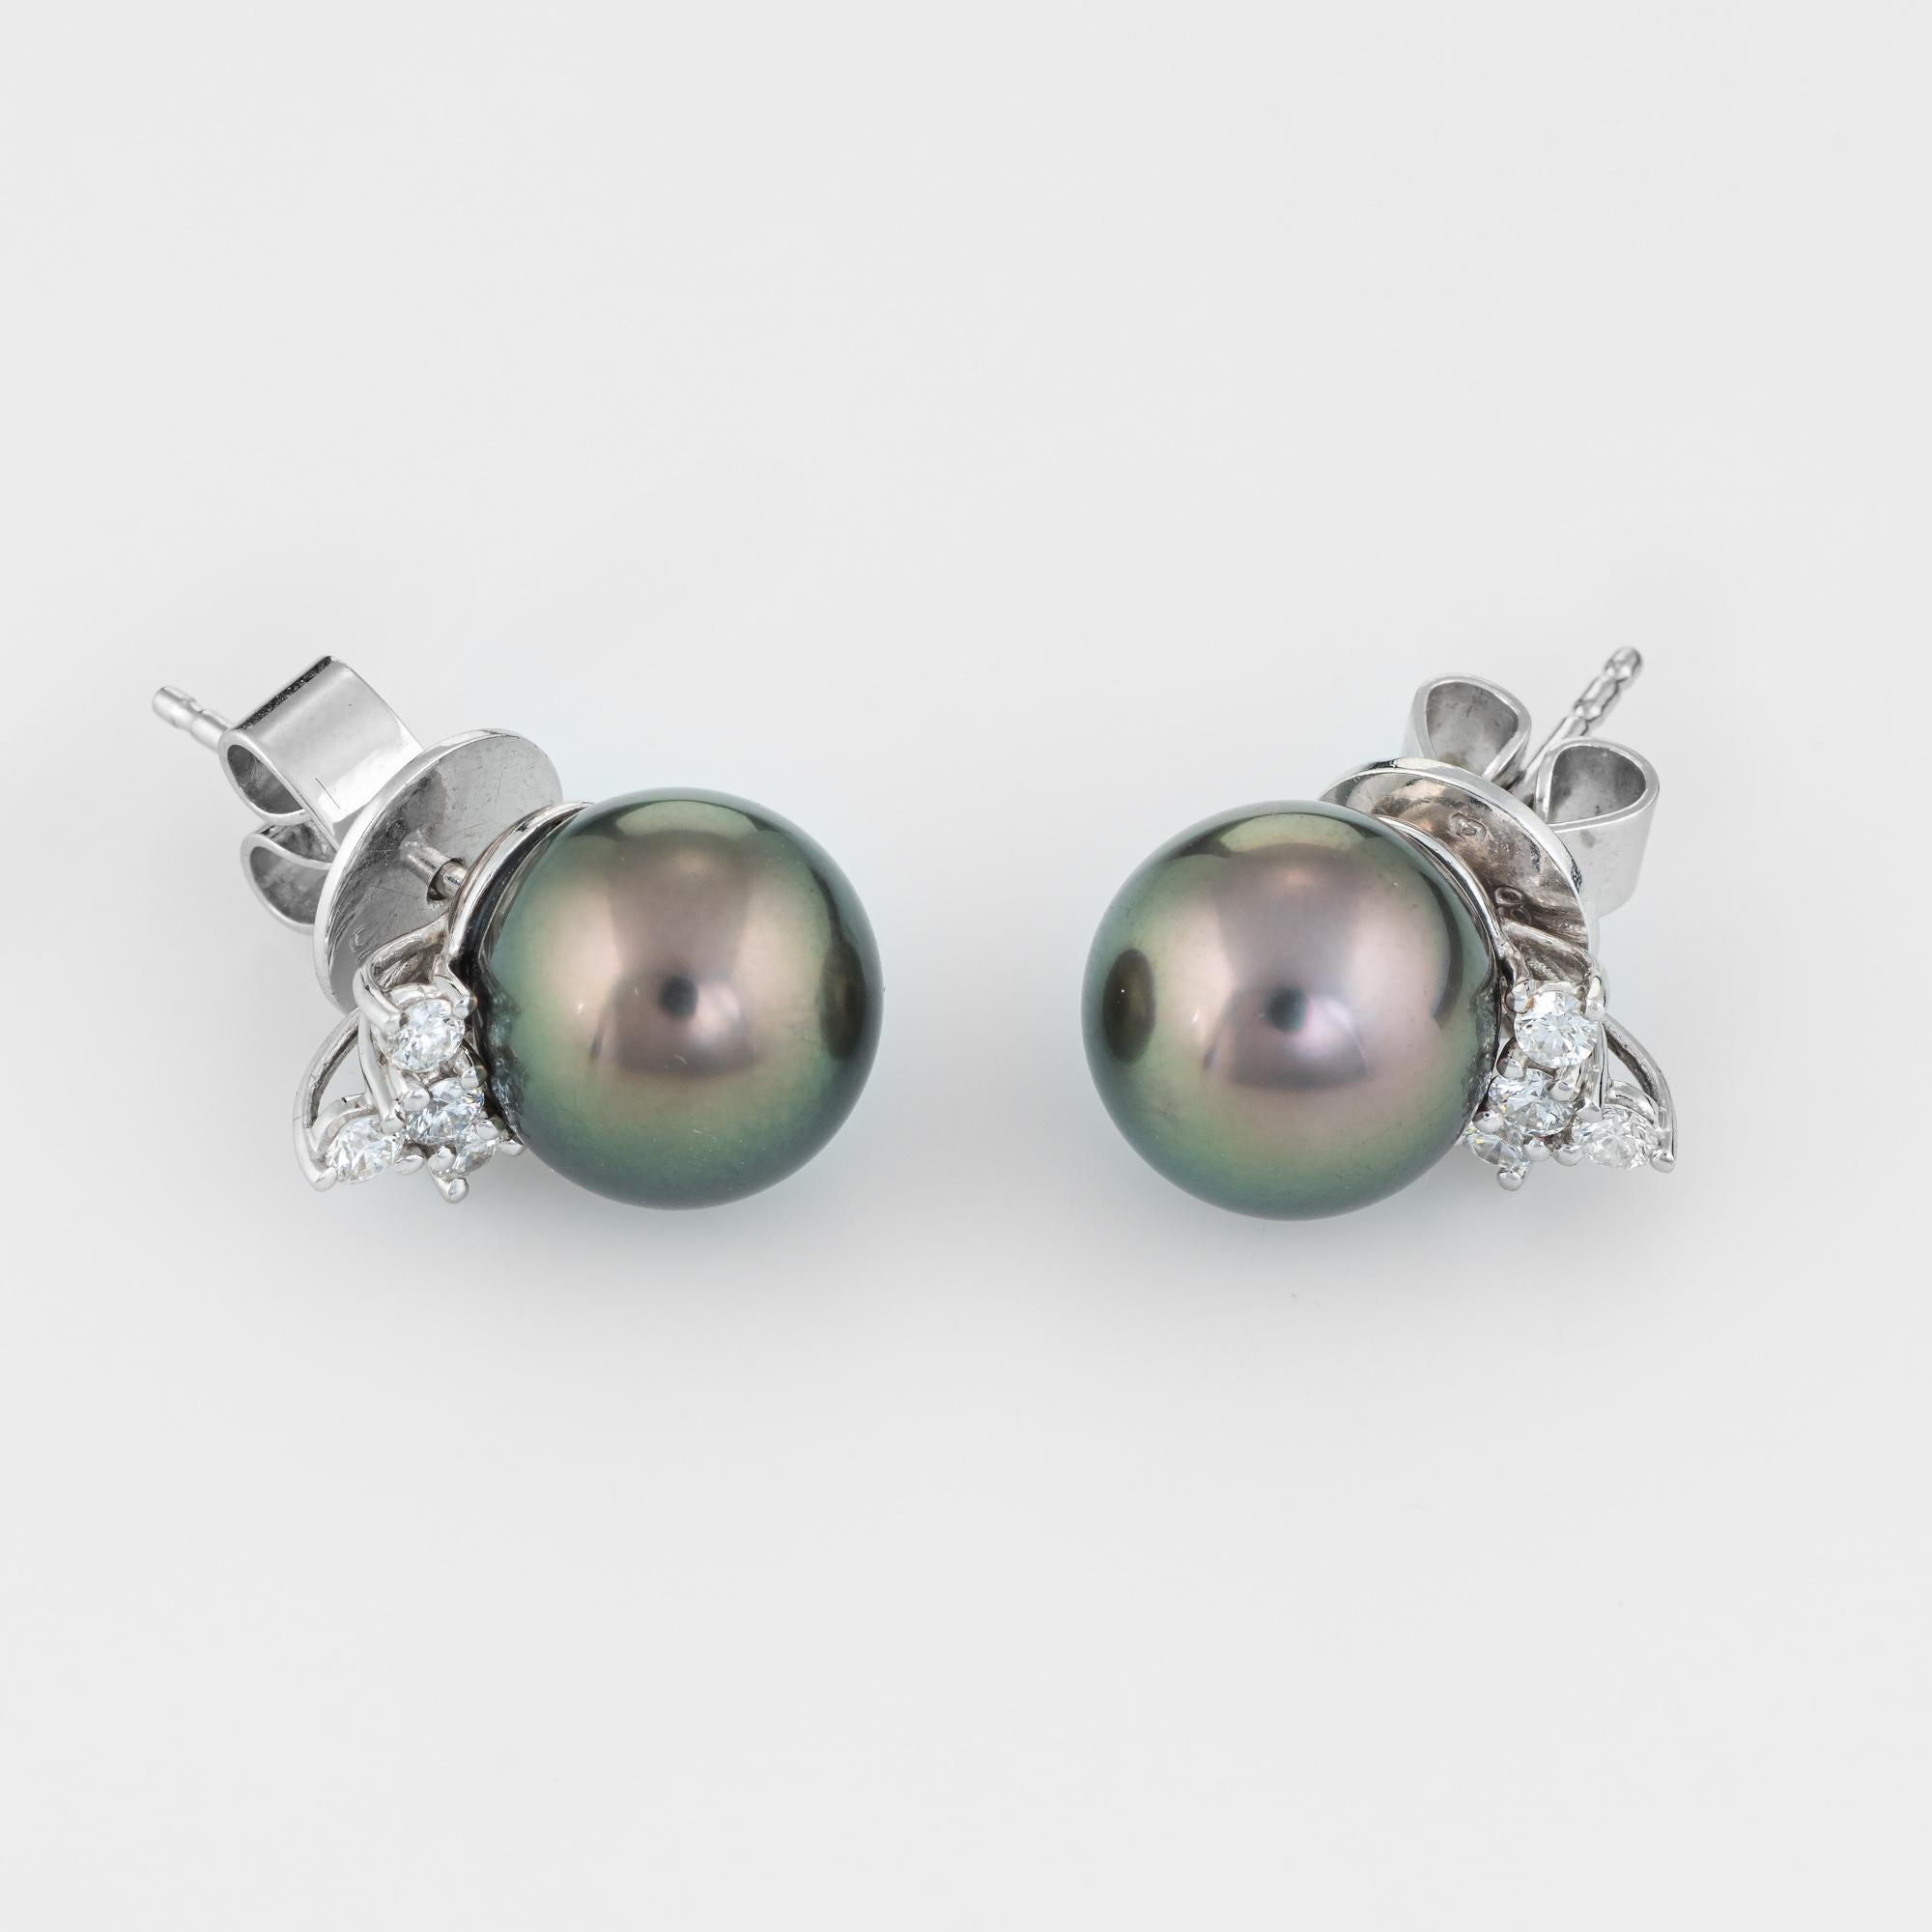 Finely detailed pair of estate cultured Tahitian black pearl & diamond stud earrings, crafted in 18k white gold. 

Two 10mm cultured Tahitian black pearls are accented with six estimated 0.03 carat diamonds. The total diamond weight is estimated at